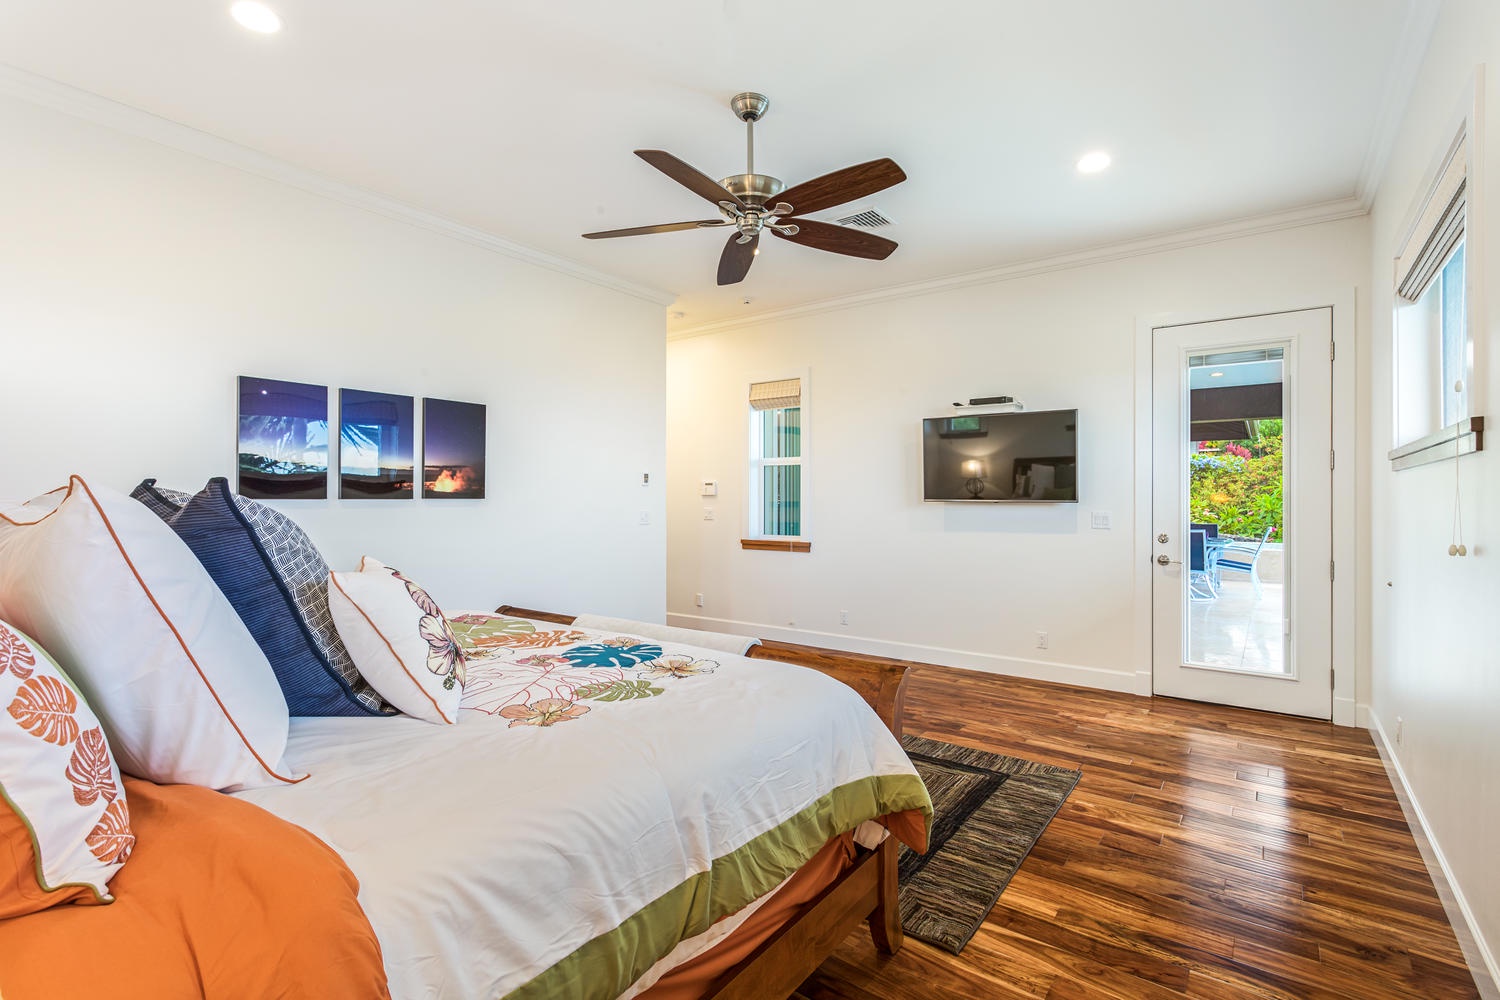 Kailua Kona Vacation Rentals, Ohana le'ale'a - The Primary Bedroom features a comfortable king-size bed, direct access to the lanai, and an en suite bath